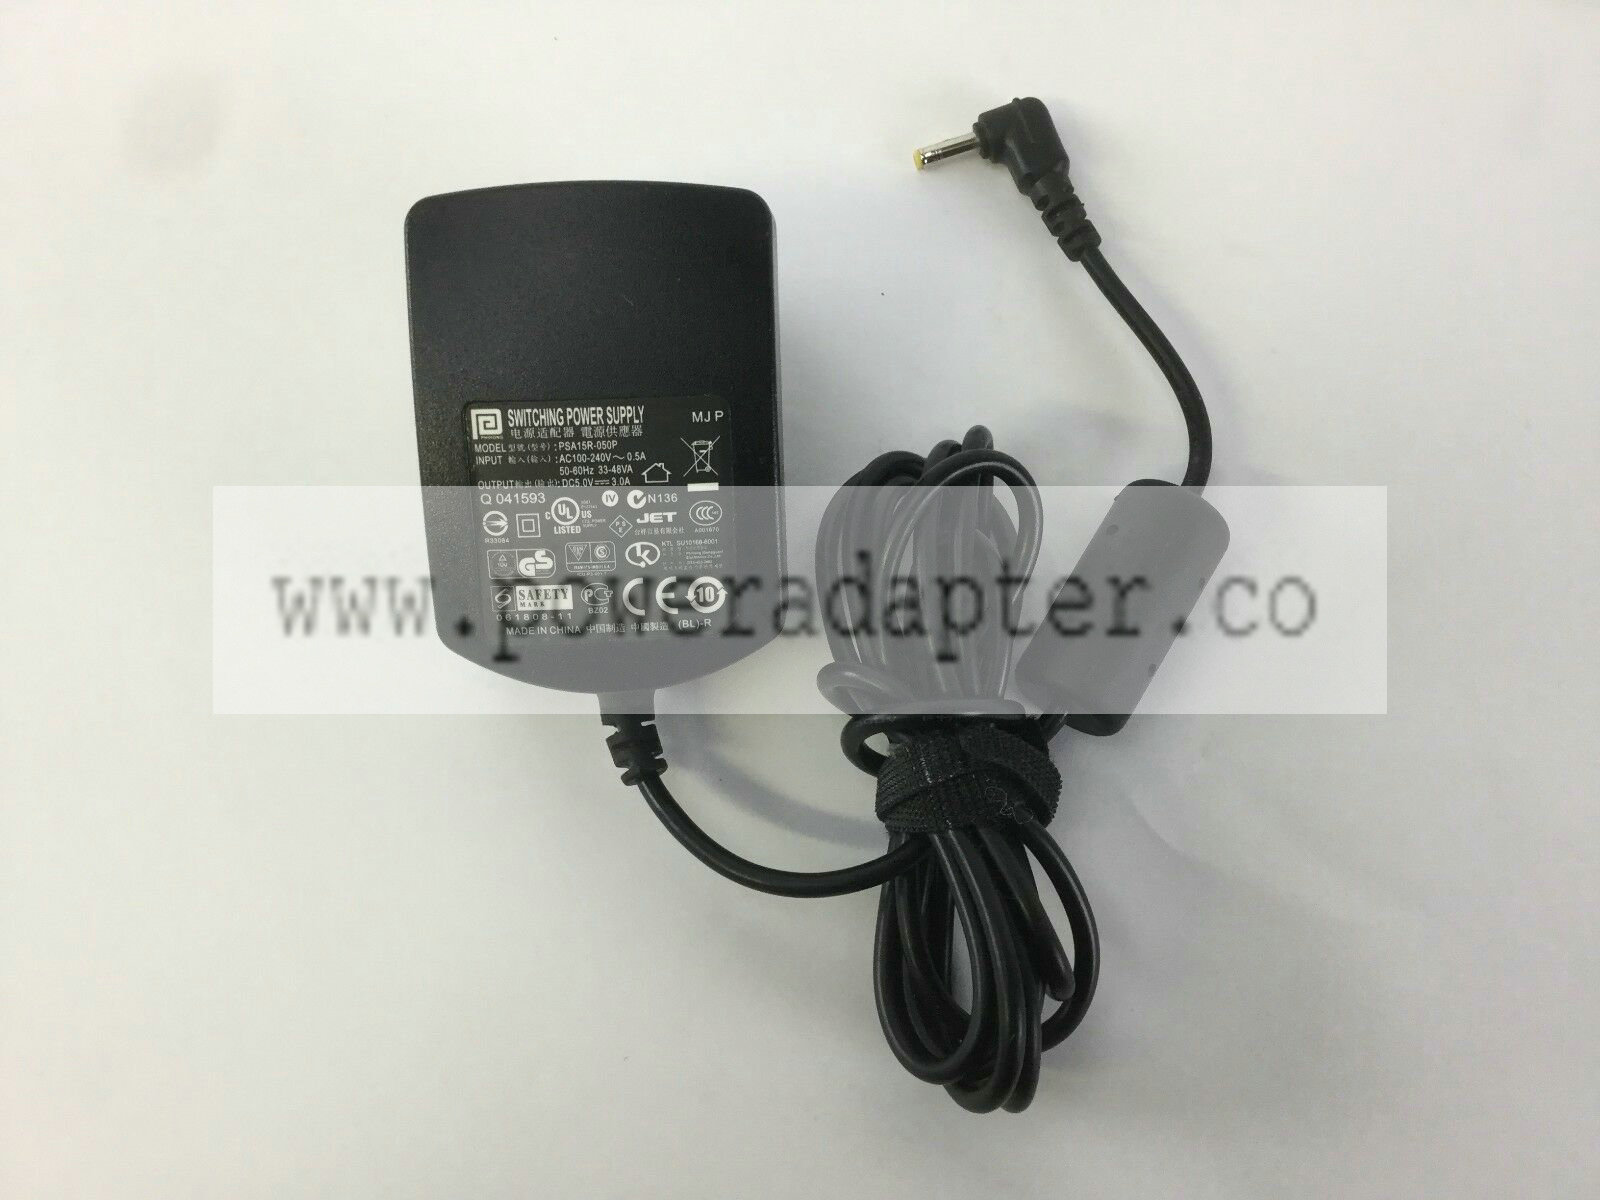 Phihong PSA15R-050P Switching Power Supply Wall Charger Adapter (Lot of 3) Brand: Phihong Output Voltage: 5V MPN: D